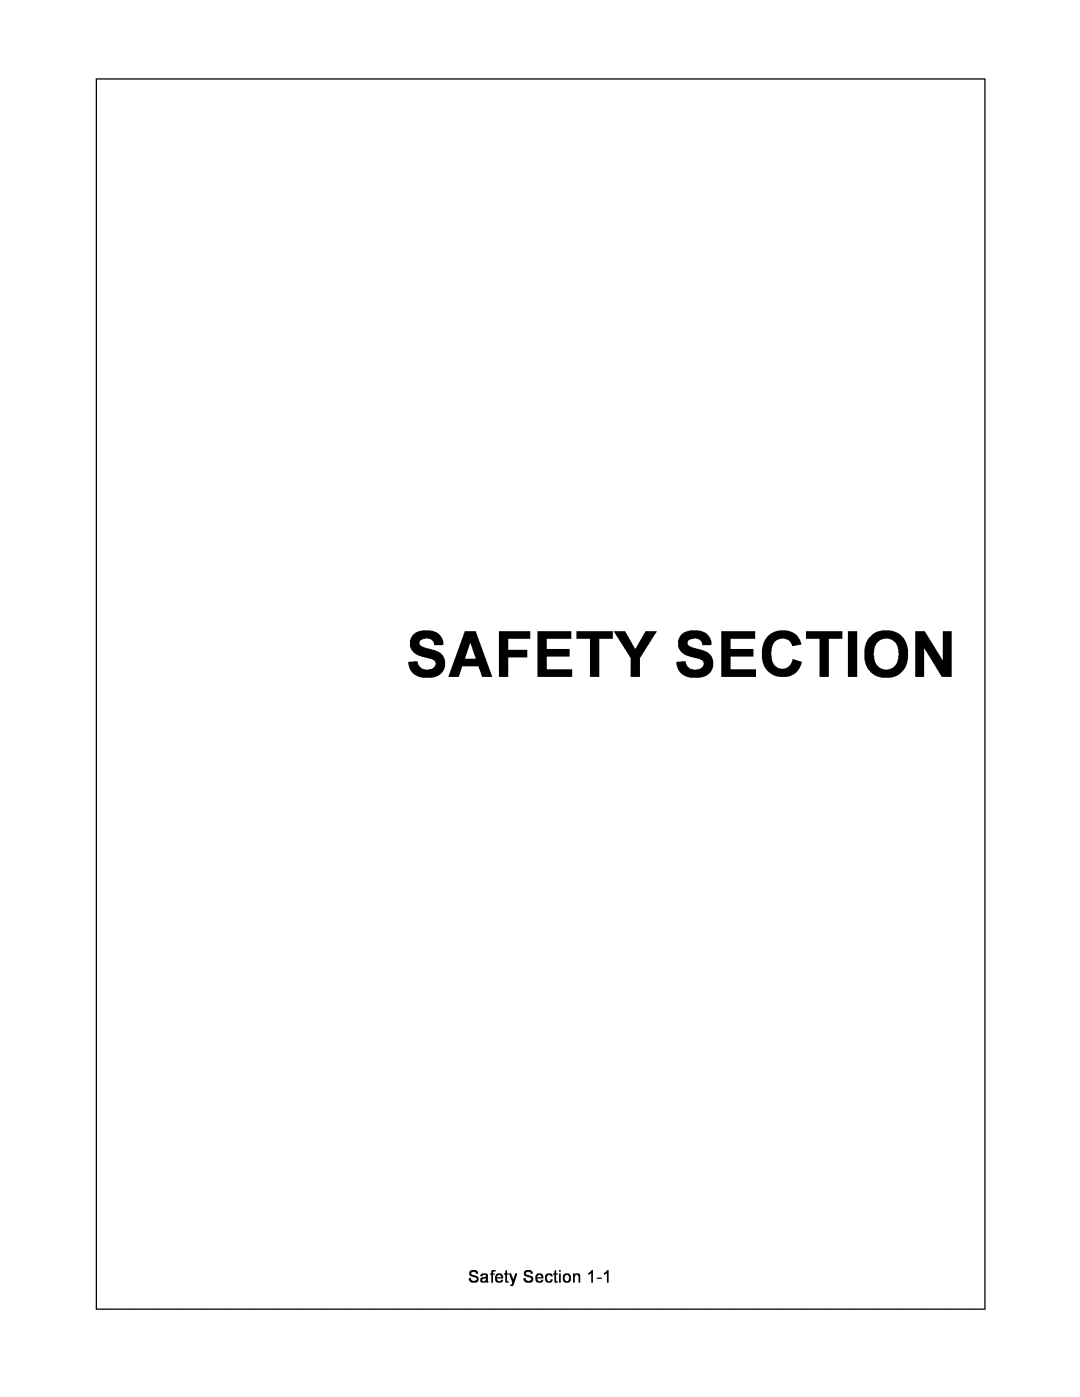 Rhino Mounts 148 manual Safety Section 